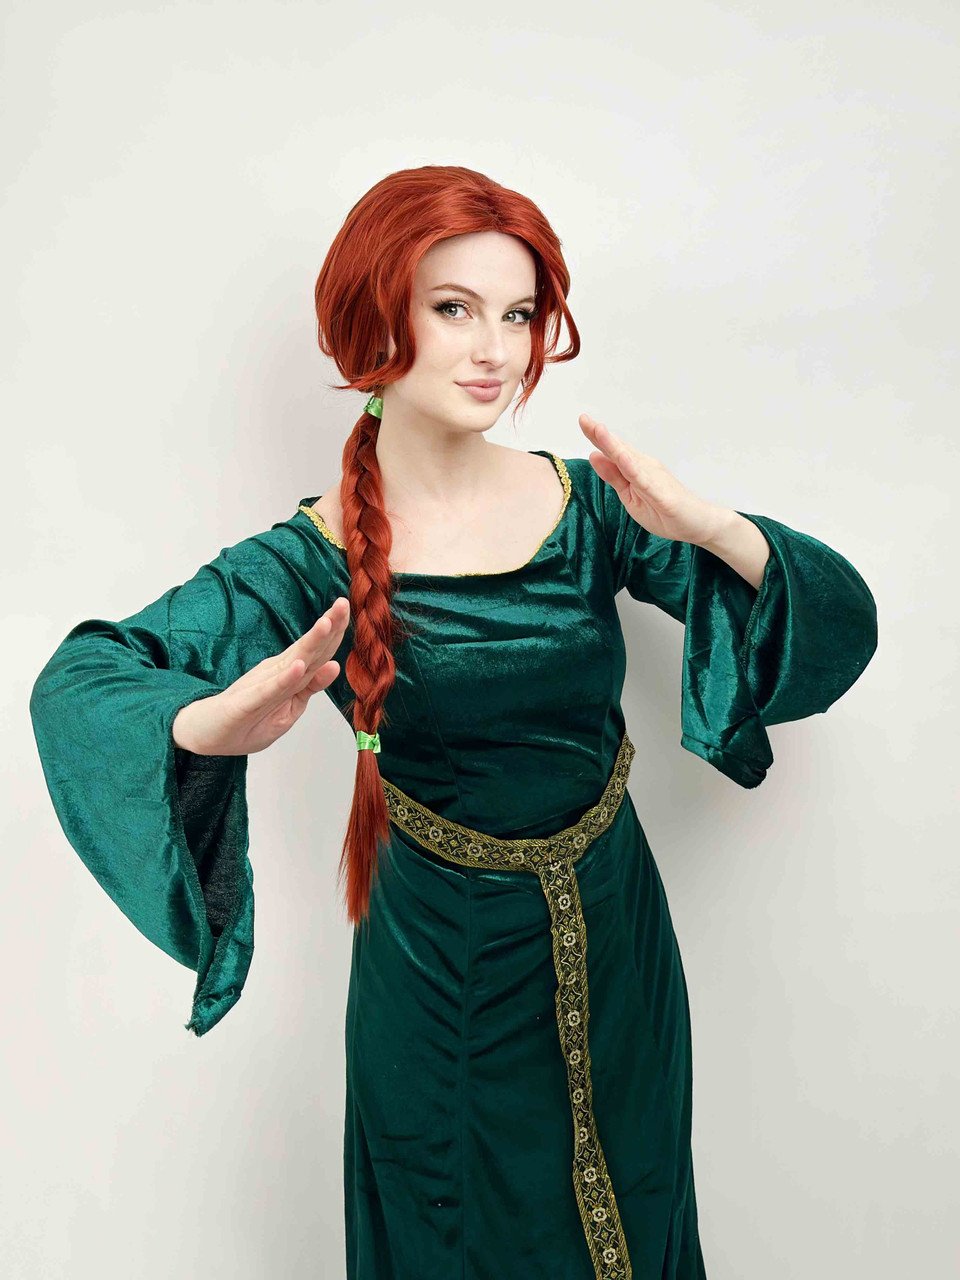 Wig Copper/Auburn/Red Long Princess Cosplay With Plait Deluxe